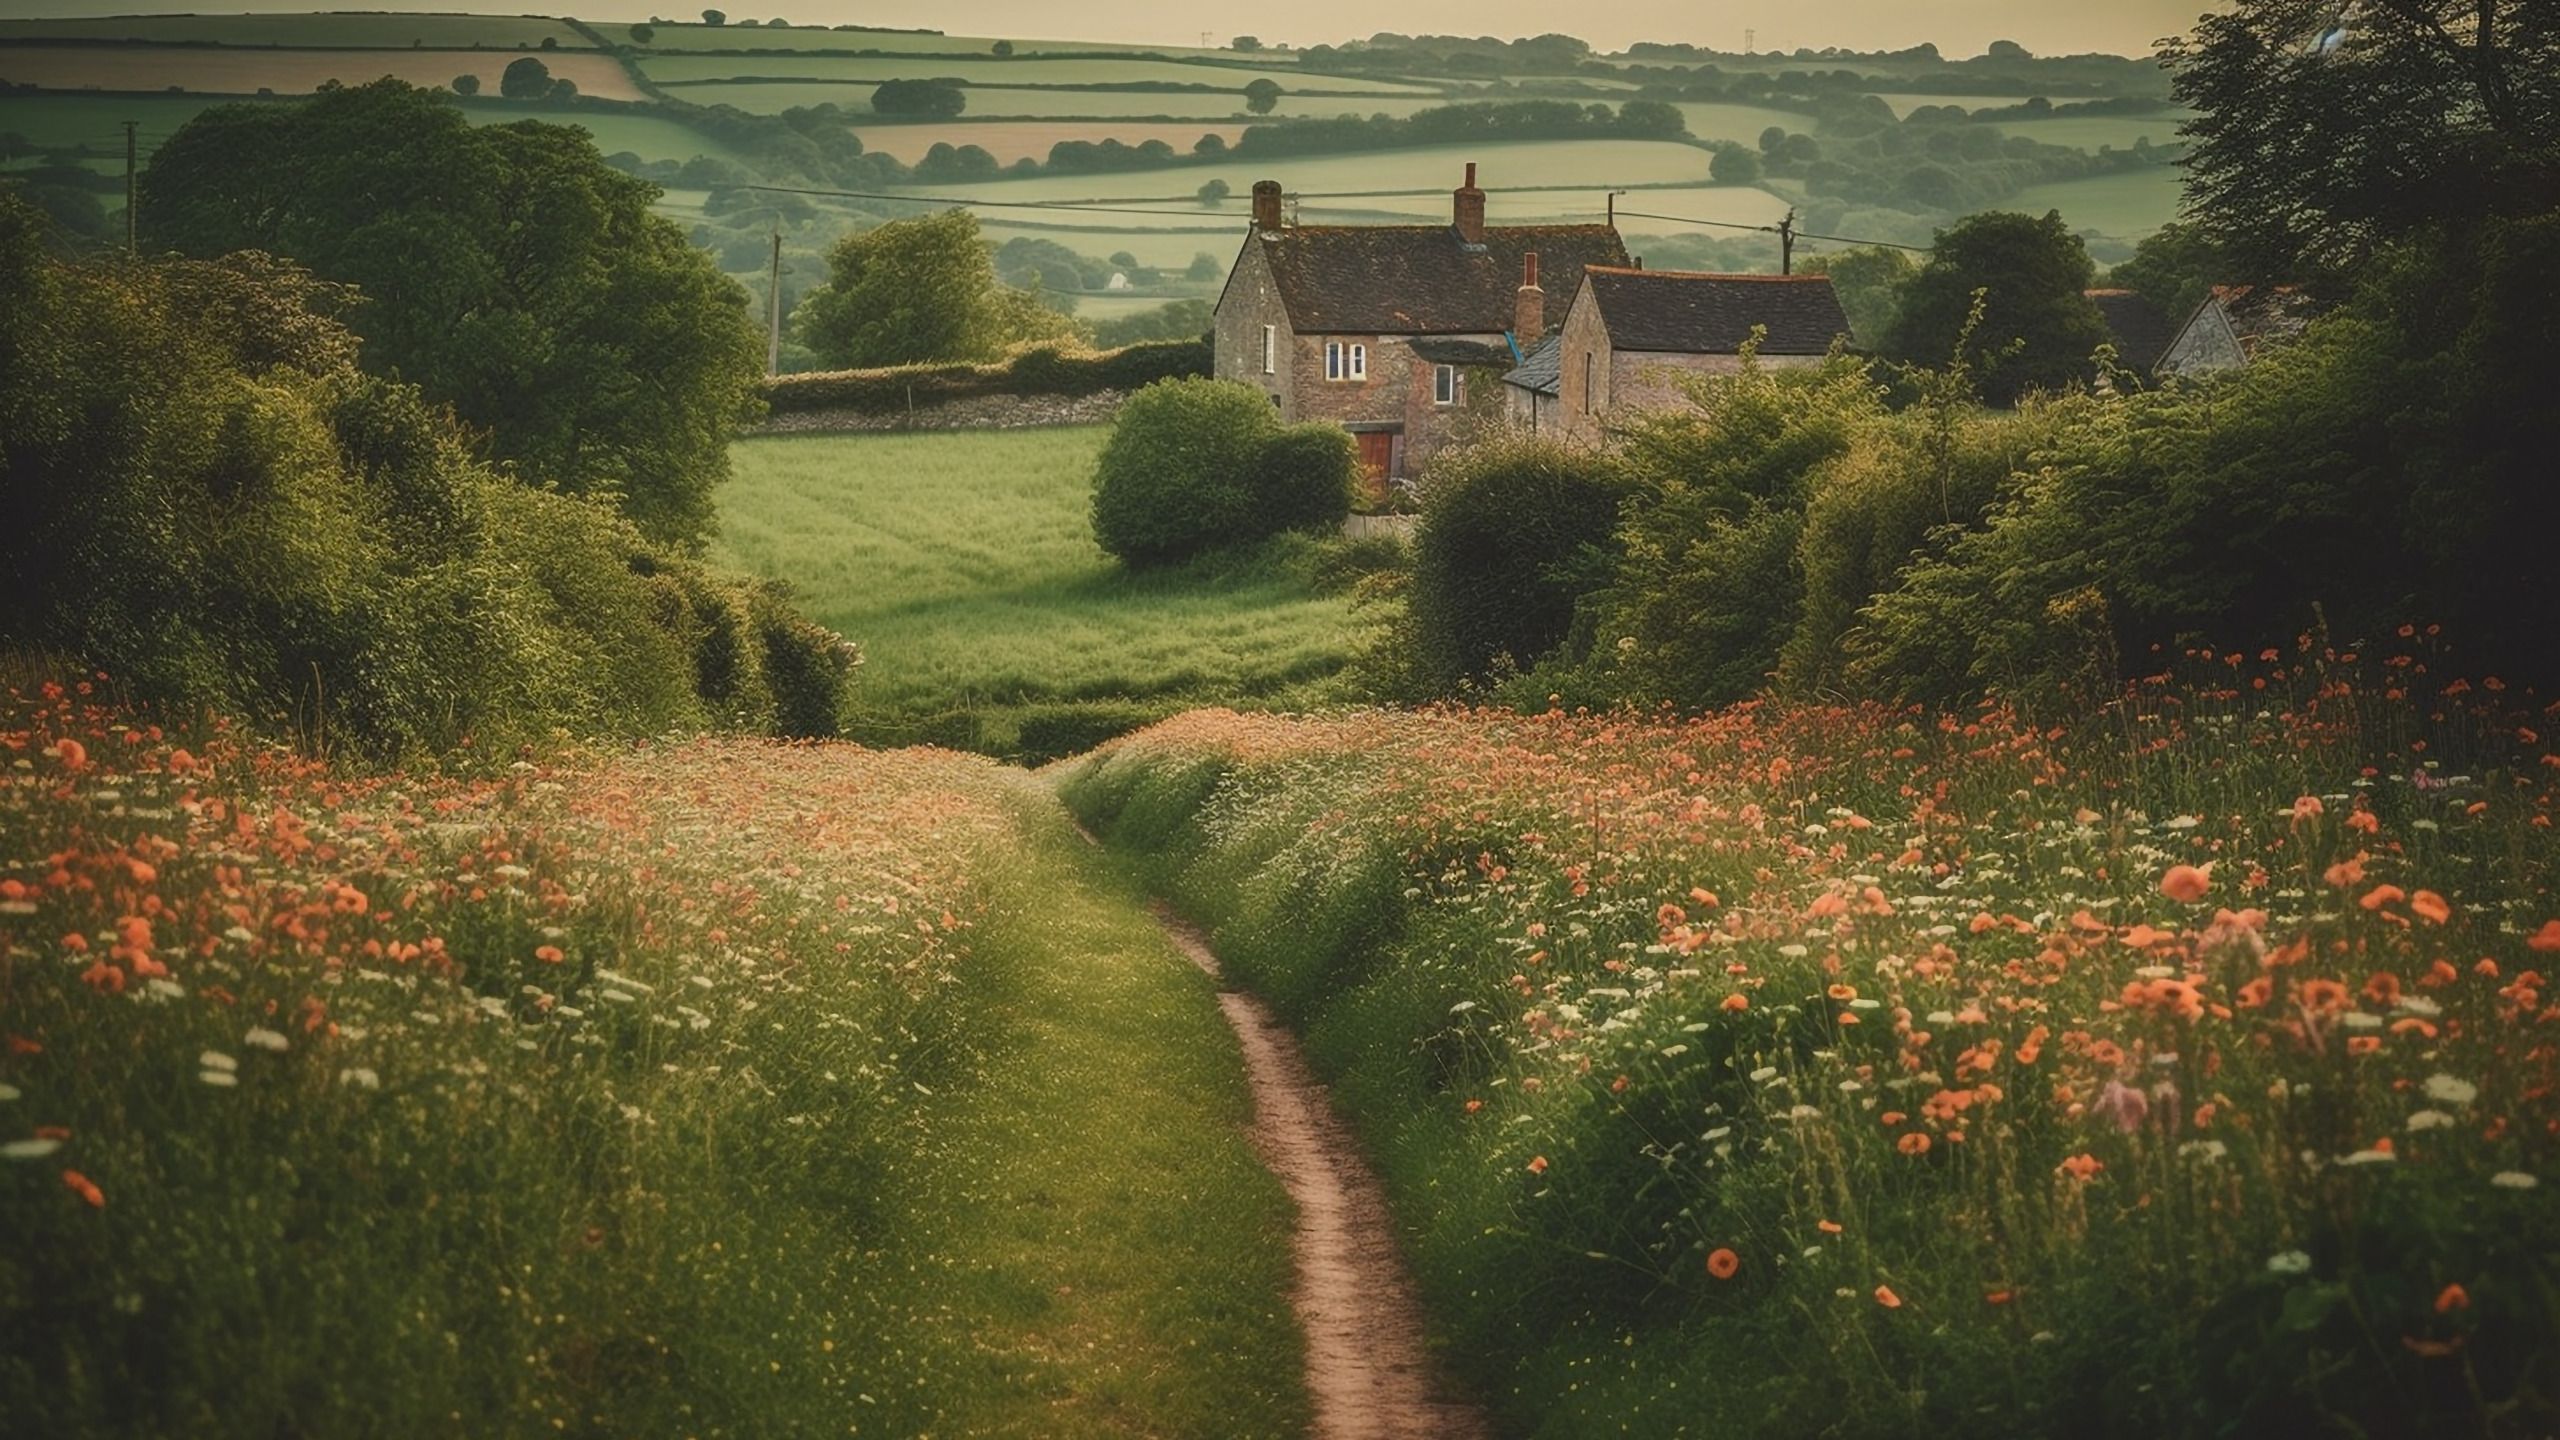 Download wallpaper field, summer, landscape, flowers, nature, hills, field, home, section ai art in resolution 2560x1440